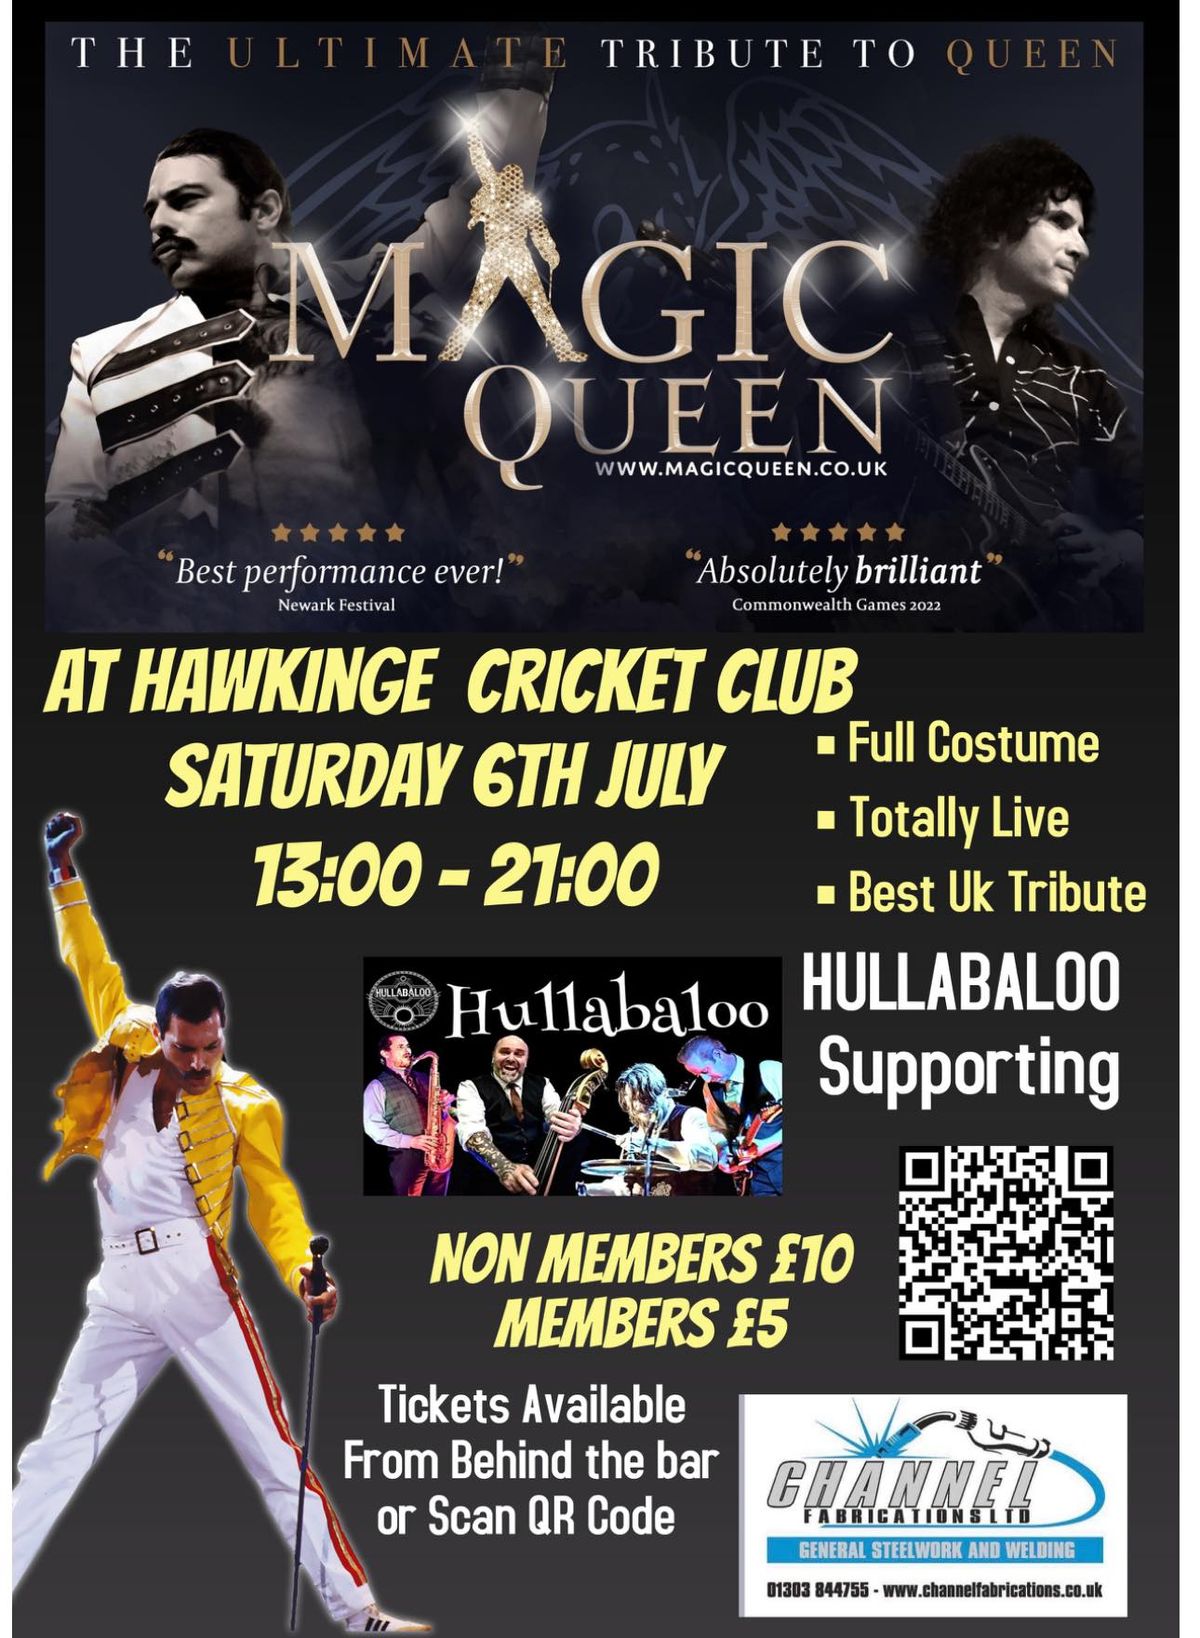 Magic Queen Tribute Featuring Hullablaoo Outside